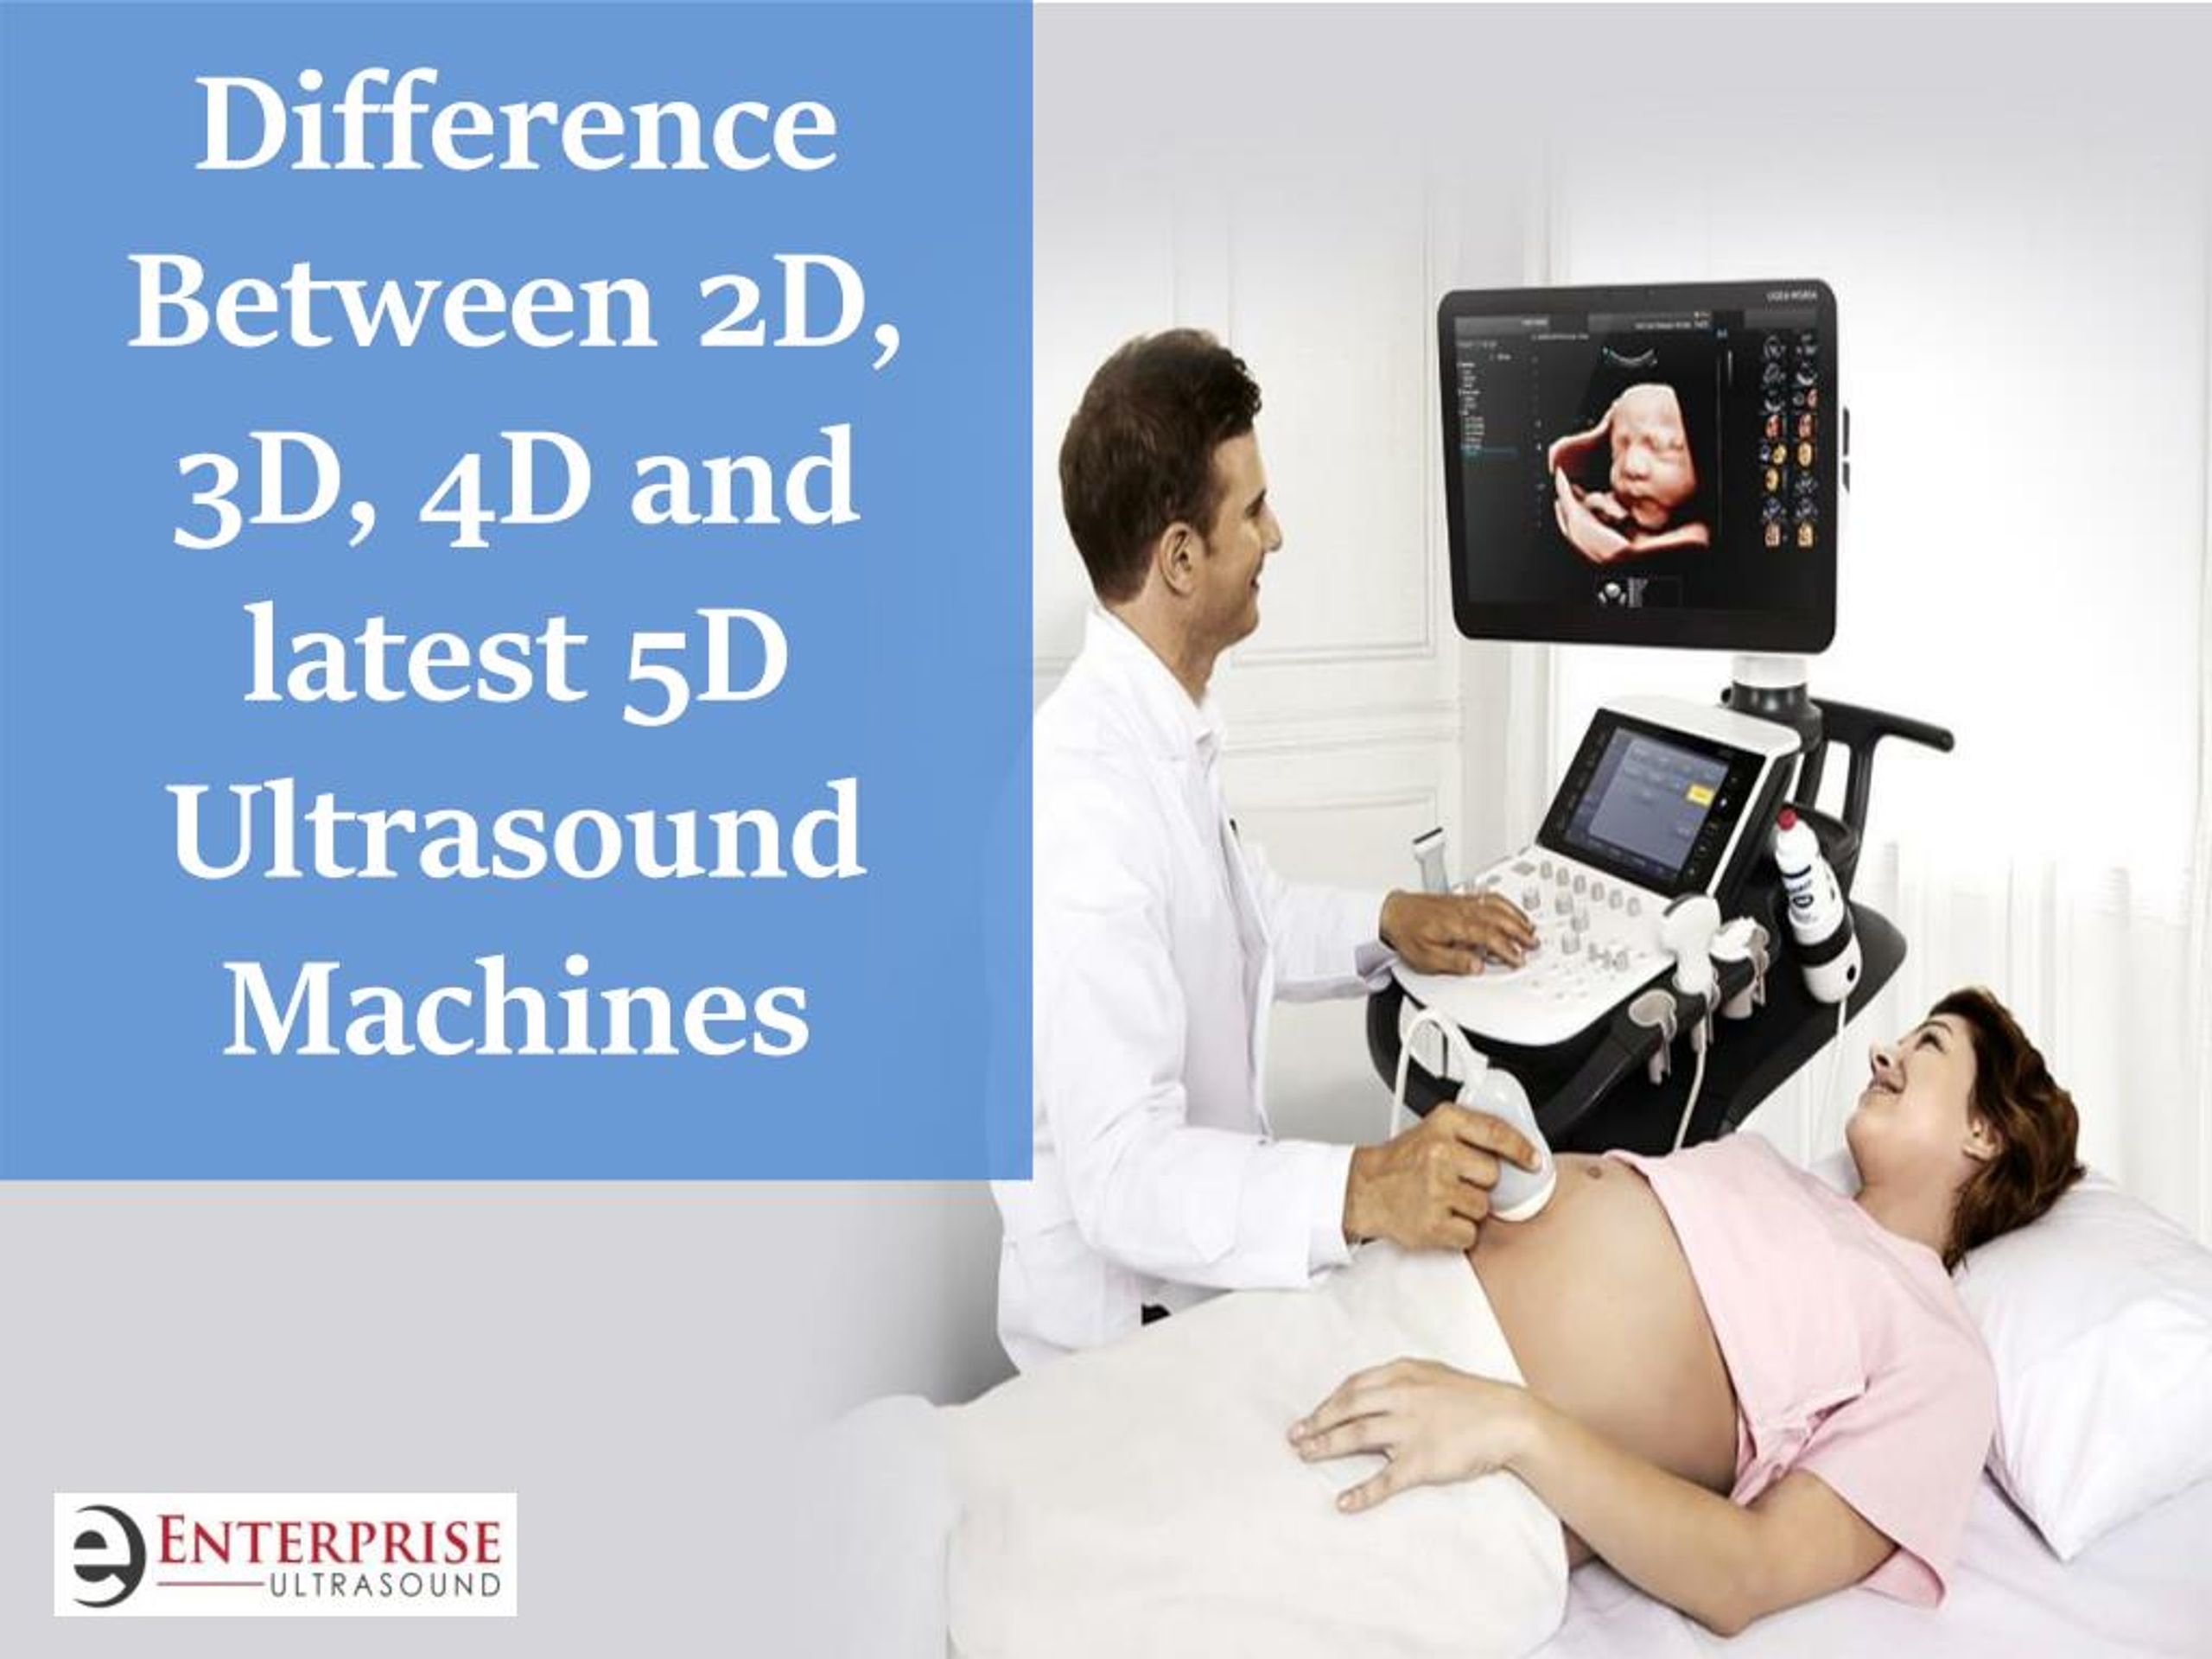 PPT - Diffrence Between 2D, 3D, 4D, and latest 5D Ultrasound Machine  PowerPoint Presentation - ID:7333338